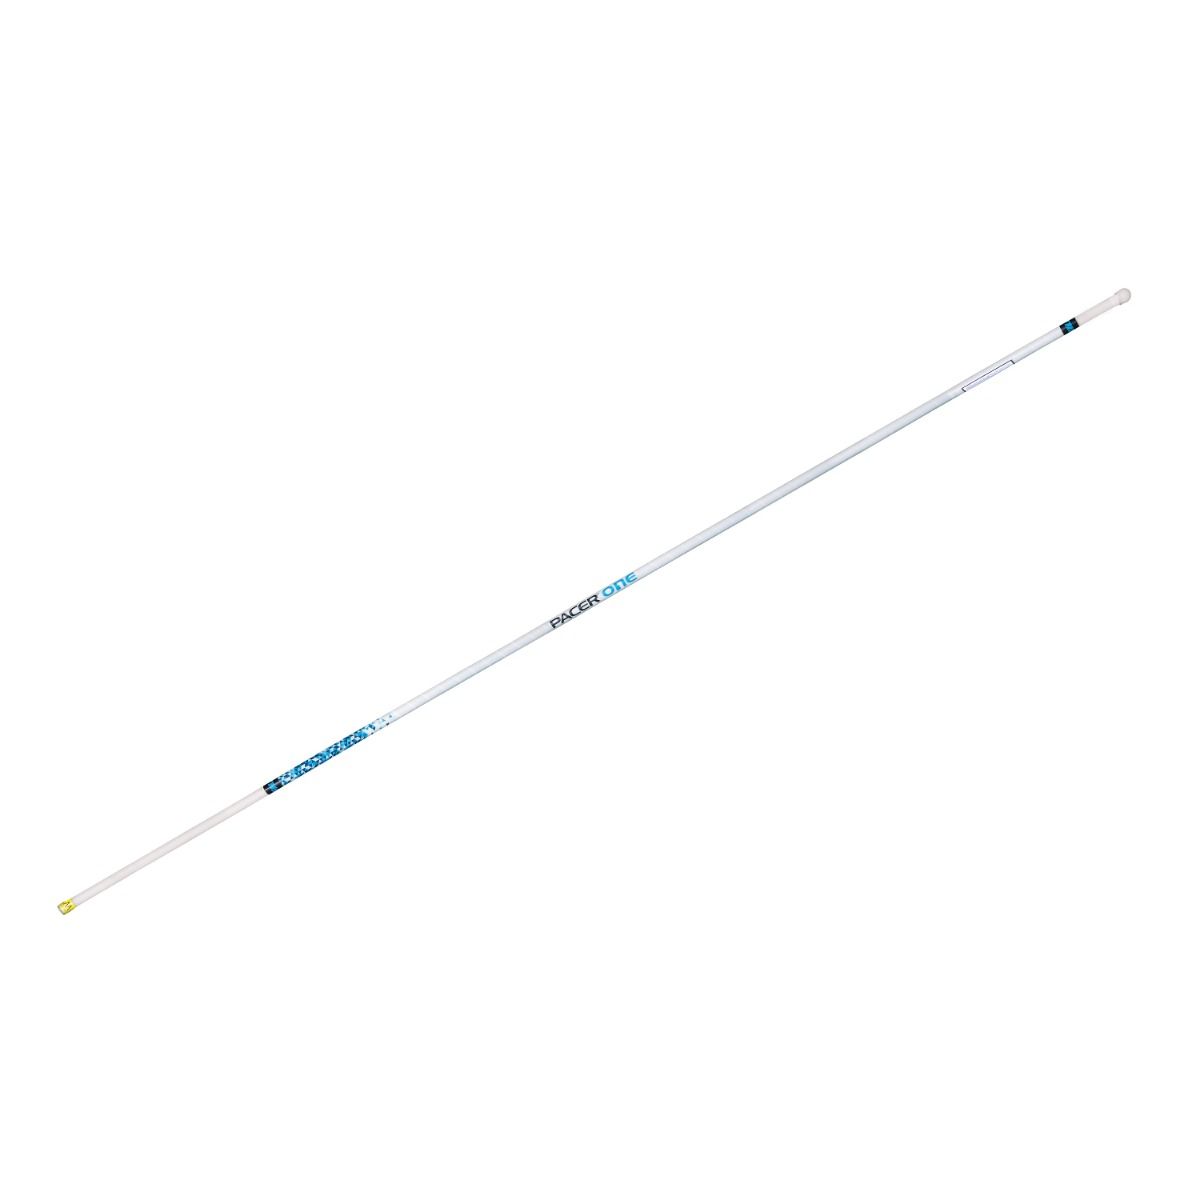 Gill 12' 6" Pacer One Vaulting Pole